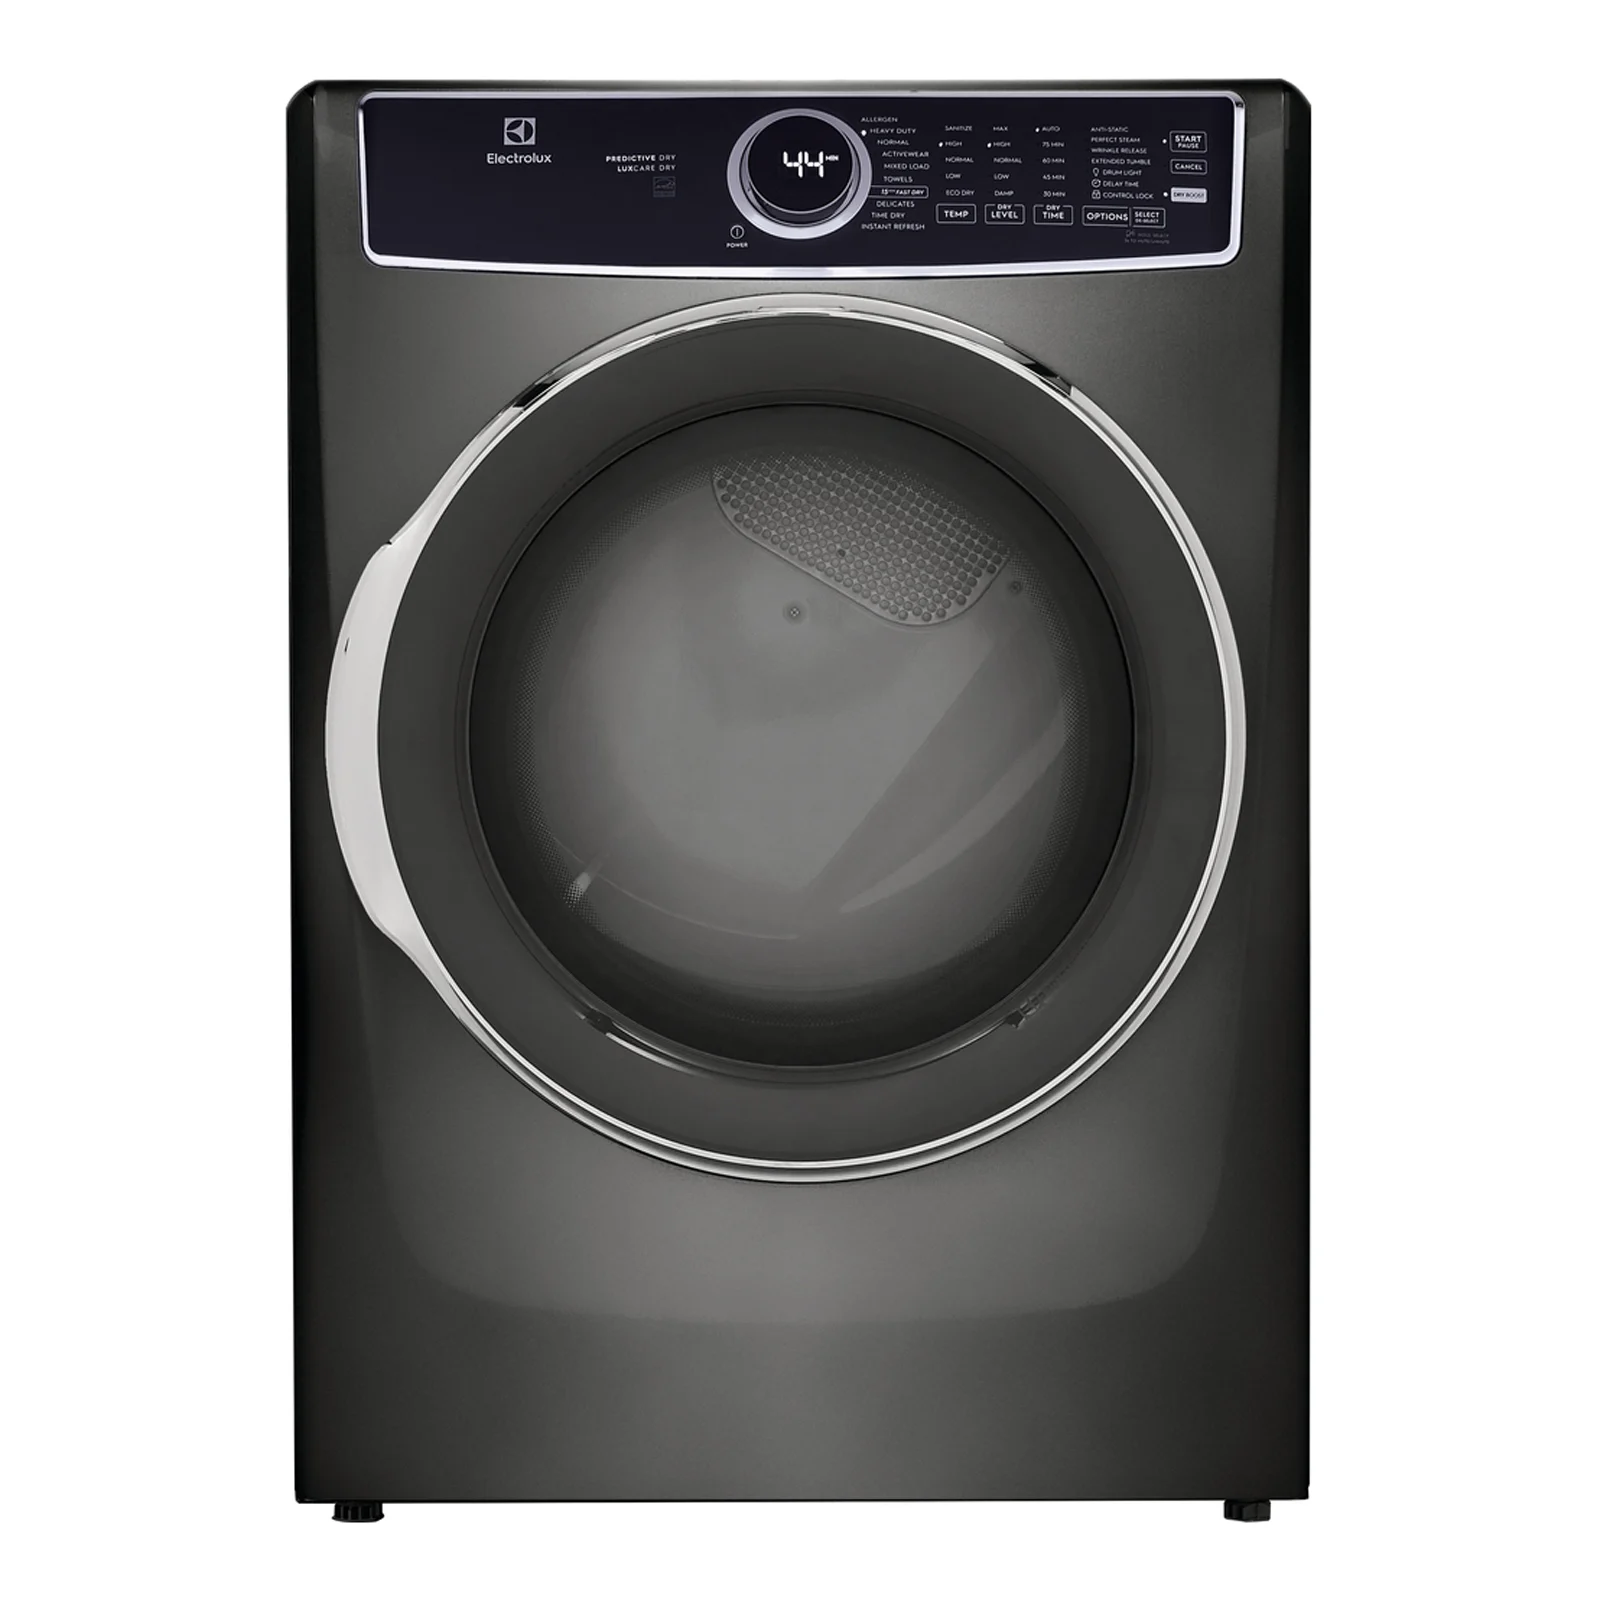 An electric dryer